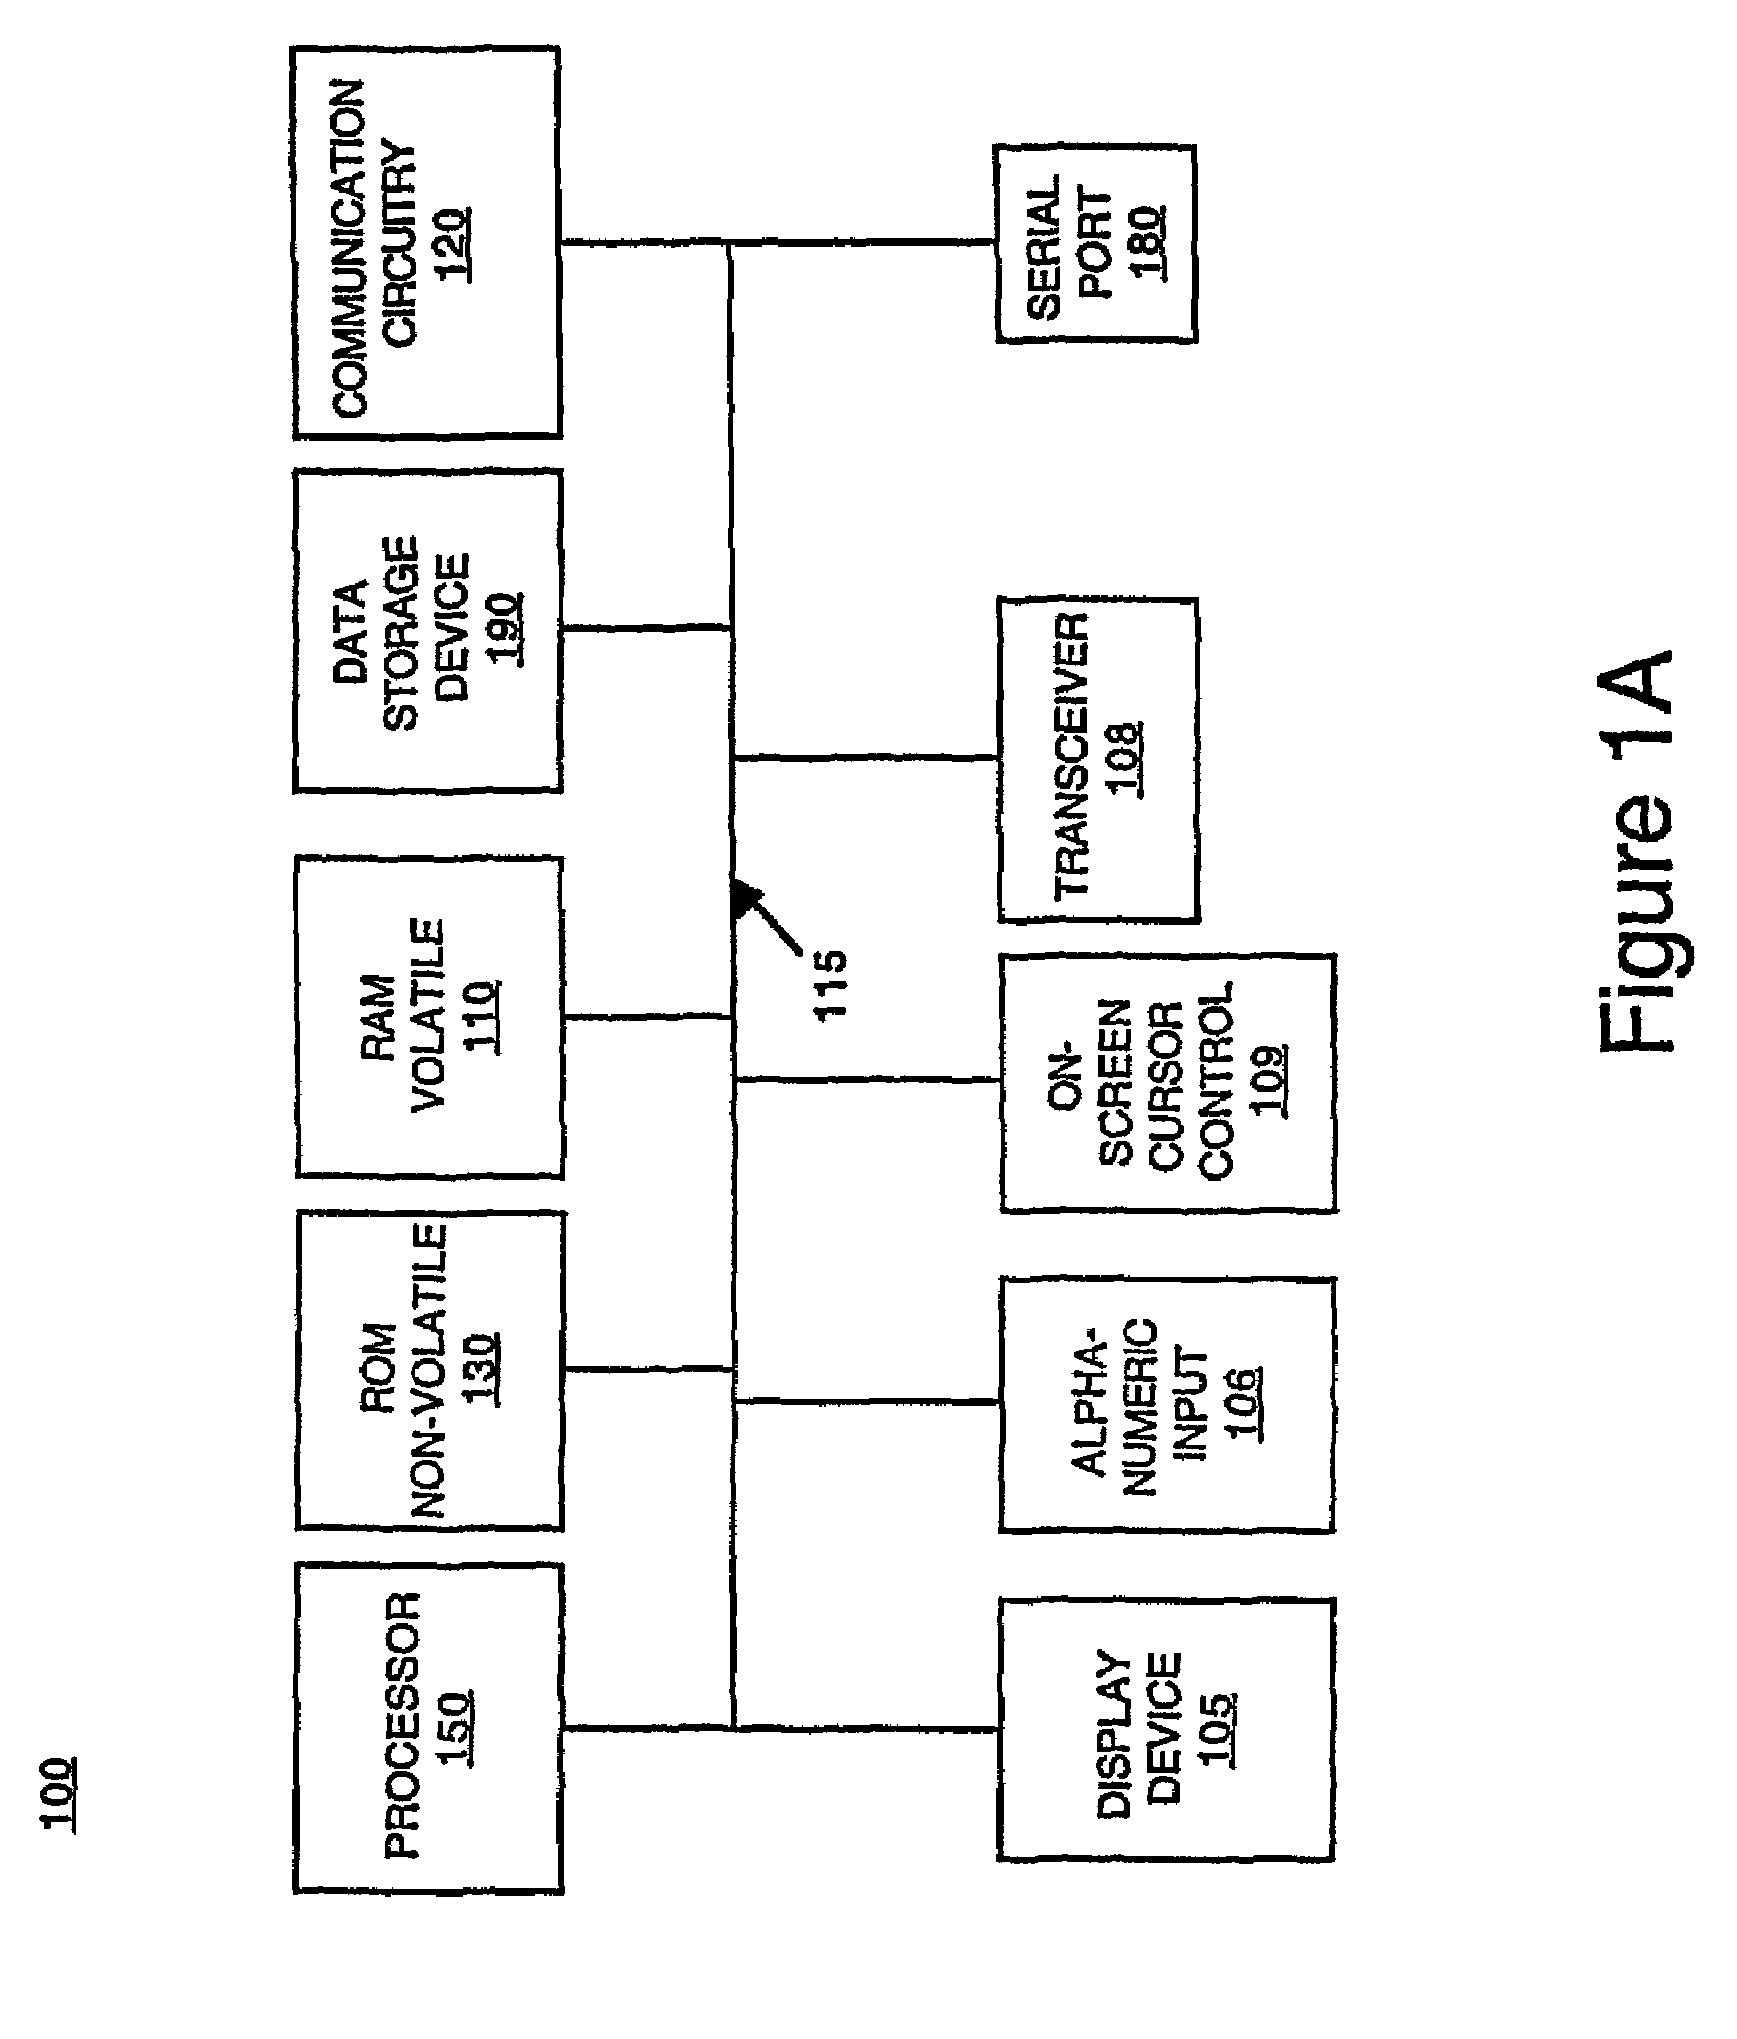 Low power scheduling for multimedia systems